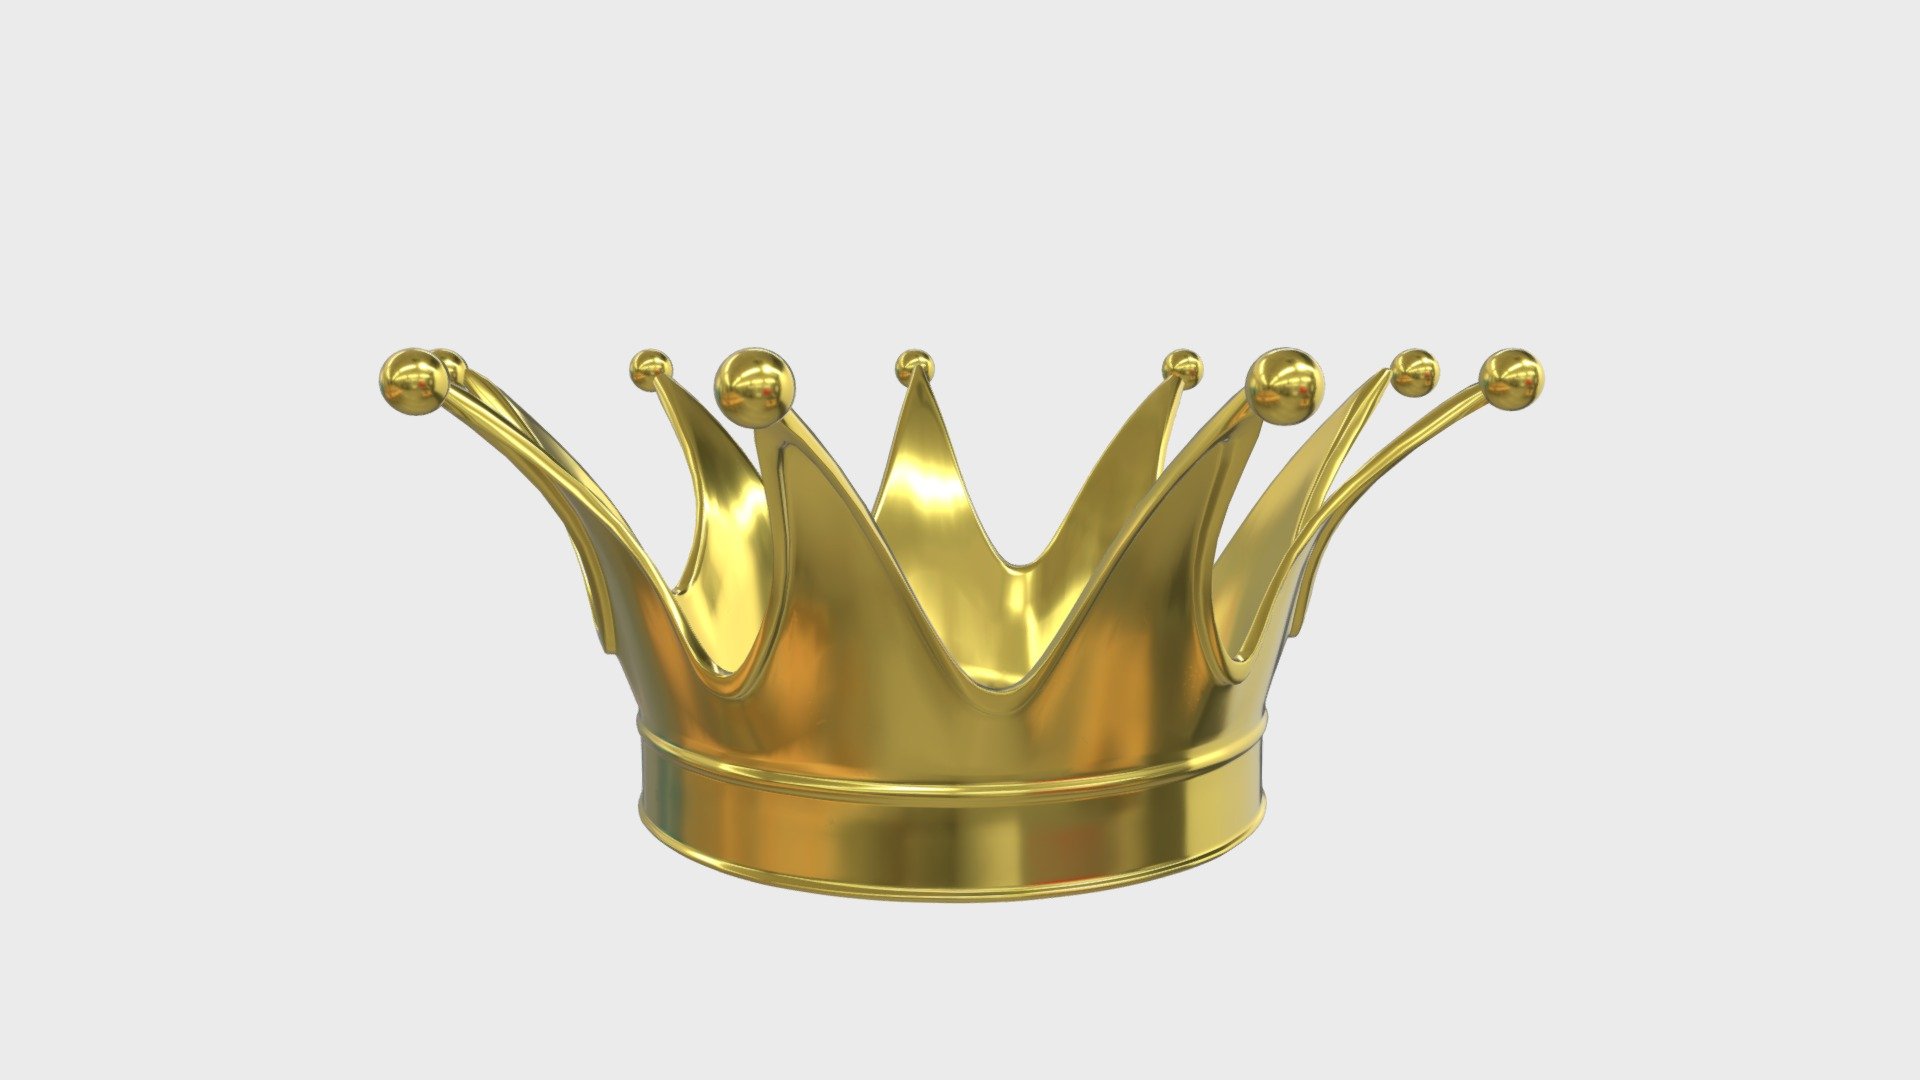 === The following description refers to the additional ZIP package provided with this model ===

Gold crown 3D Model, nr. 3 in my collection. Production-ready 3D Model, with PBR materials, textures, non overlapping UV Layout map provided in the package.

Quads only geometries (no tris/ngons).

Formats included: FBX, OBJ; scenes: BLEND (with Cycles / Eevee PBR Materials and Textures); other: png with Alpha.

1 Object (mesh), 1 PBR Material, UV unwrapped (non overlapping UV Layout map provided in the package); UV-mapped Textures.

UV Layout maps and Image Textures resolutions: 2048x2048; PBR Textures made with Substance Painter.

Polygonal, QUADS ONLY (no tris/ngons); 24588 vertices, 24570 quad faces (49140 tris).

Real world dimensions; scene scale units: cm in Blender 3.1 (that is: Metric with 0.01 scale).

Uniform scale object (scale applied in Blender 3.1) 3d model